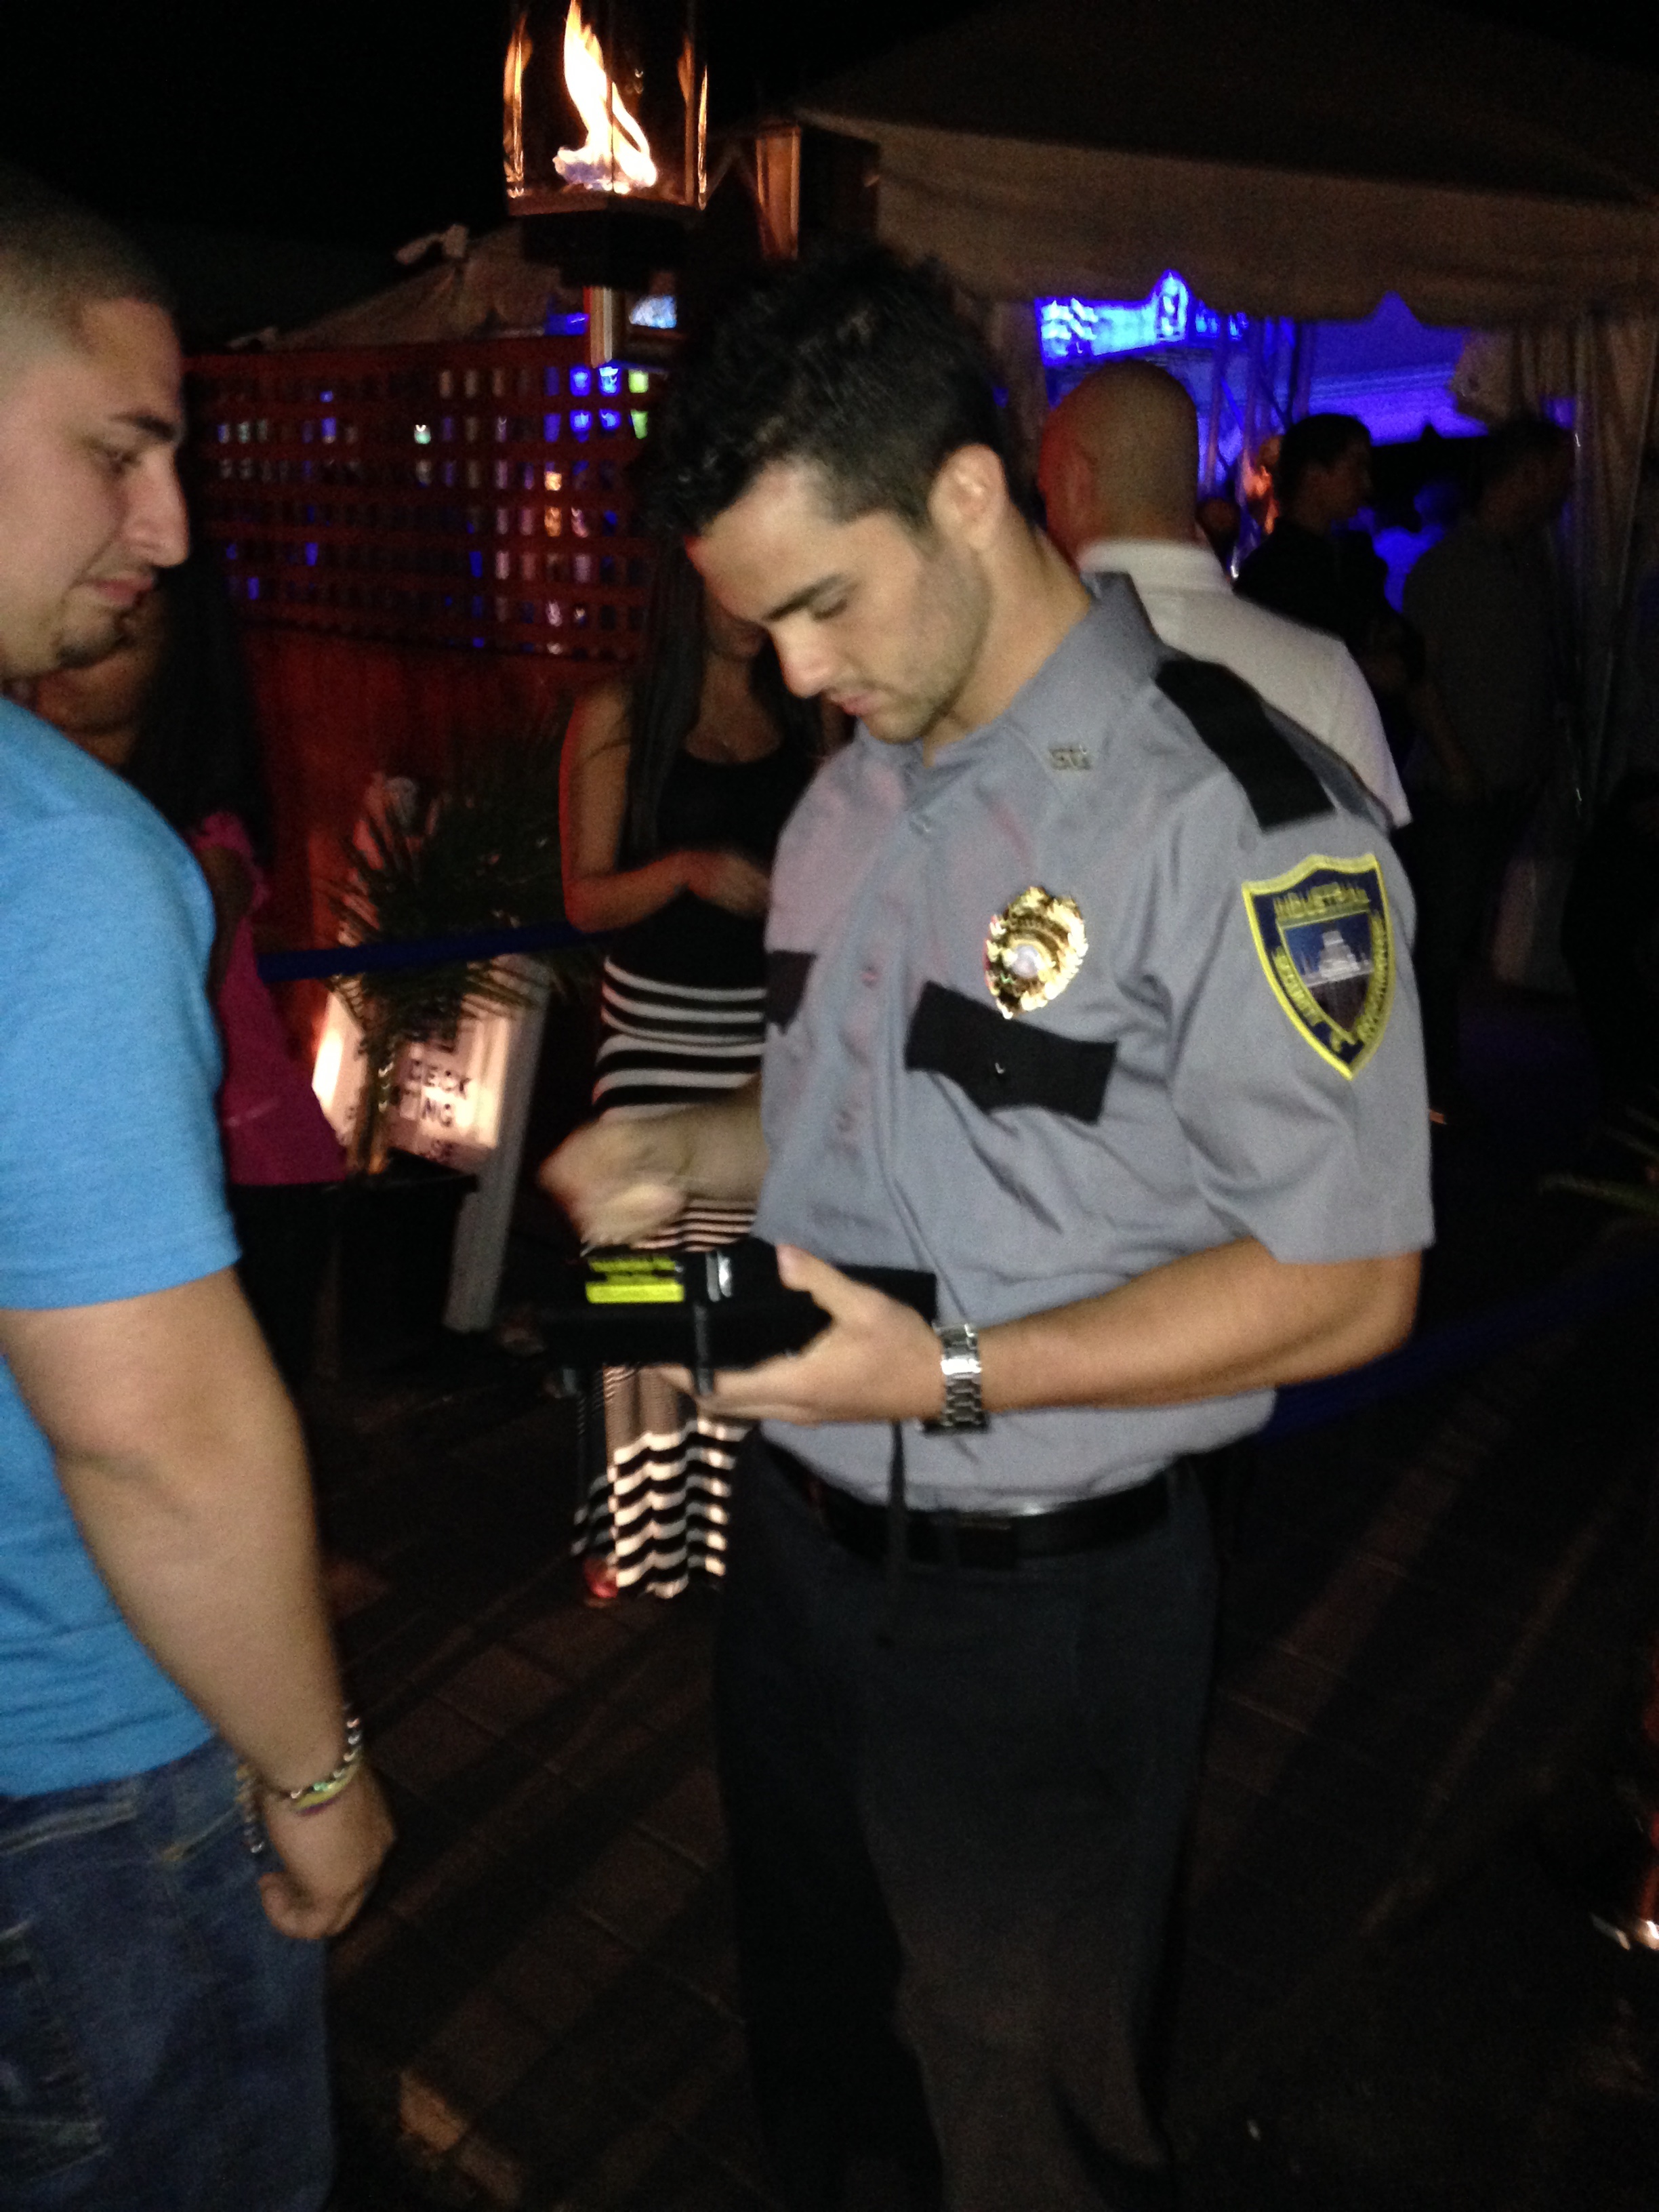 Nightclub Security – The Role of Private Security - SecurityRI